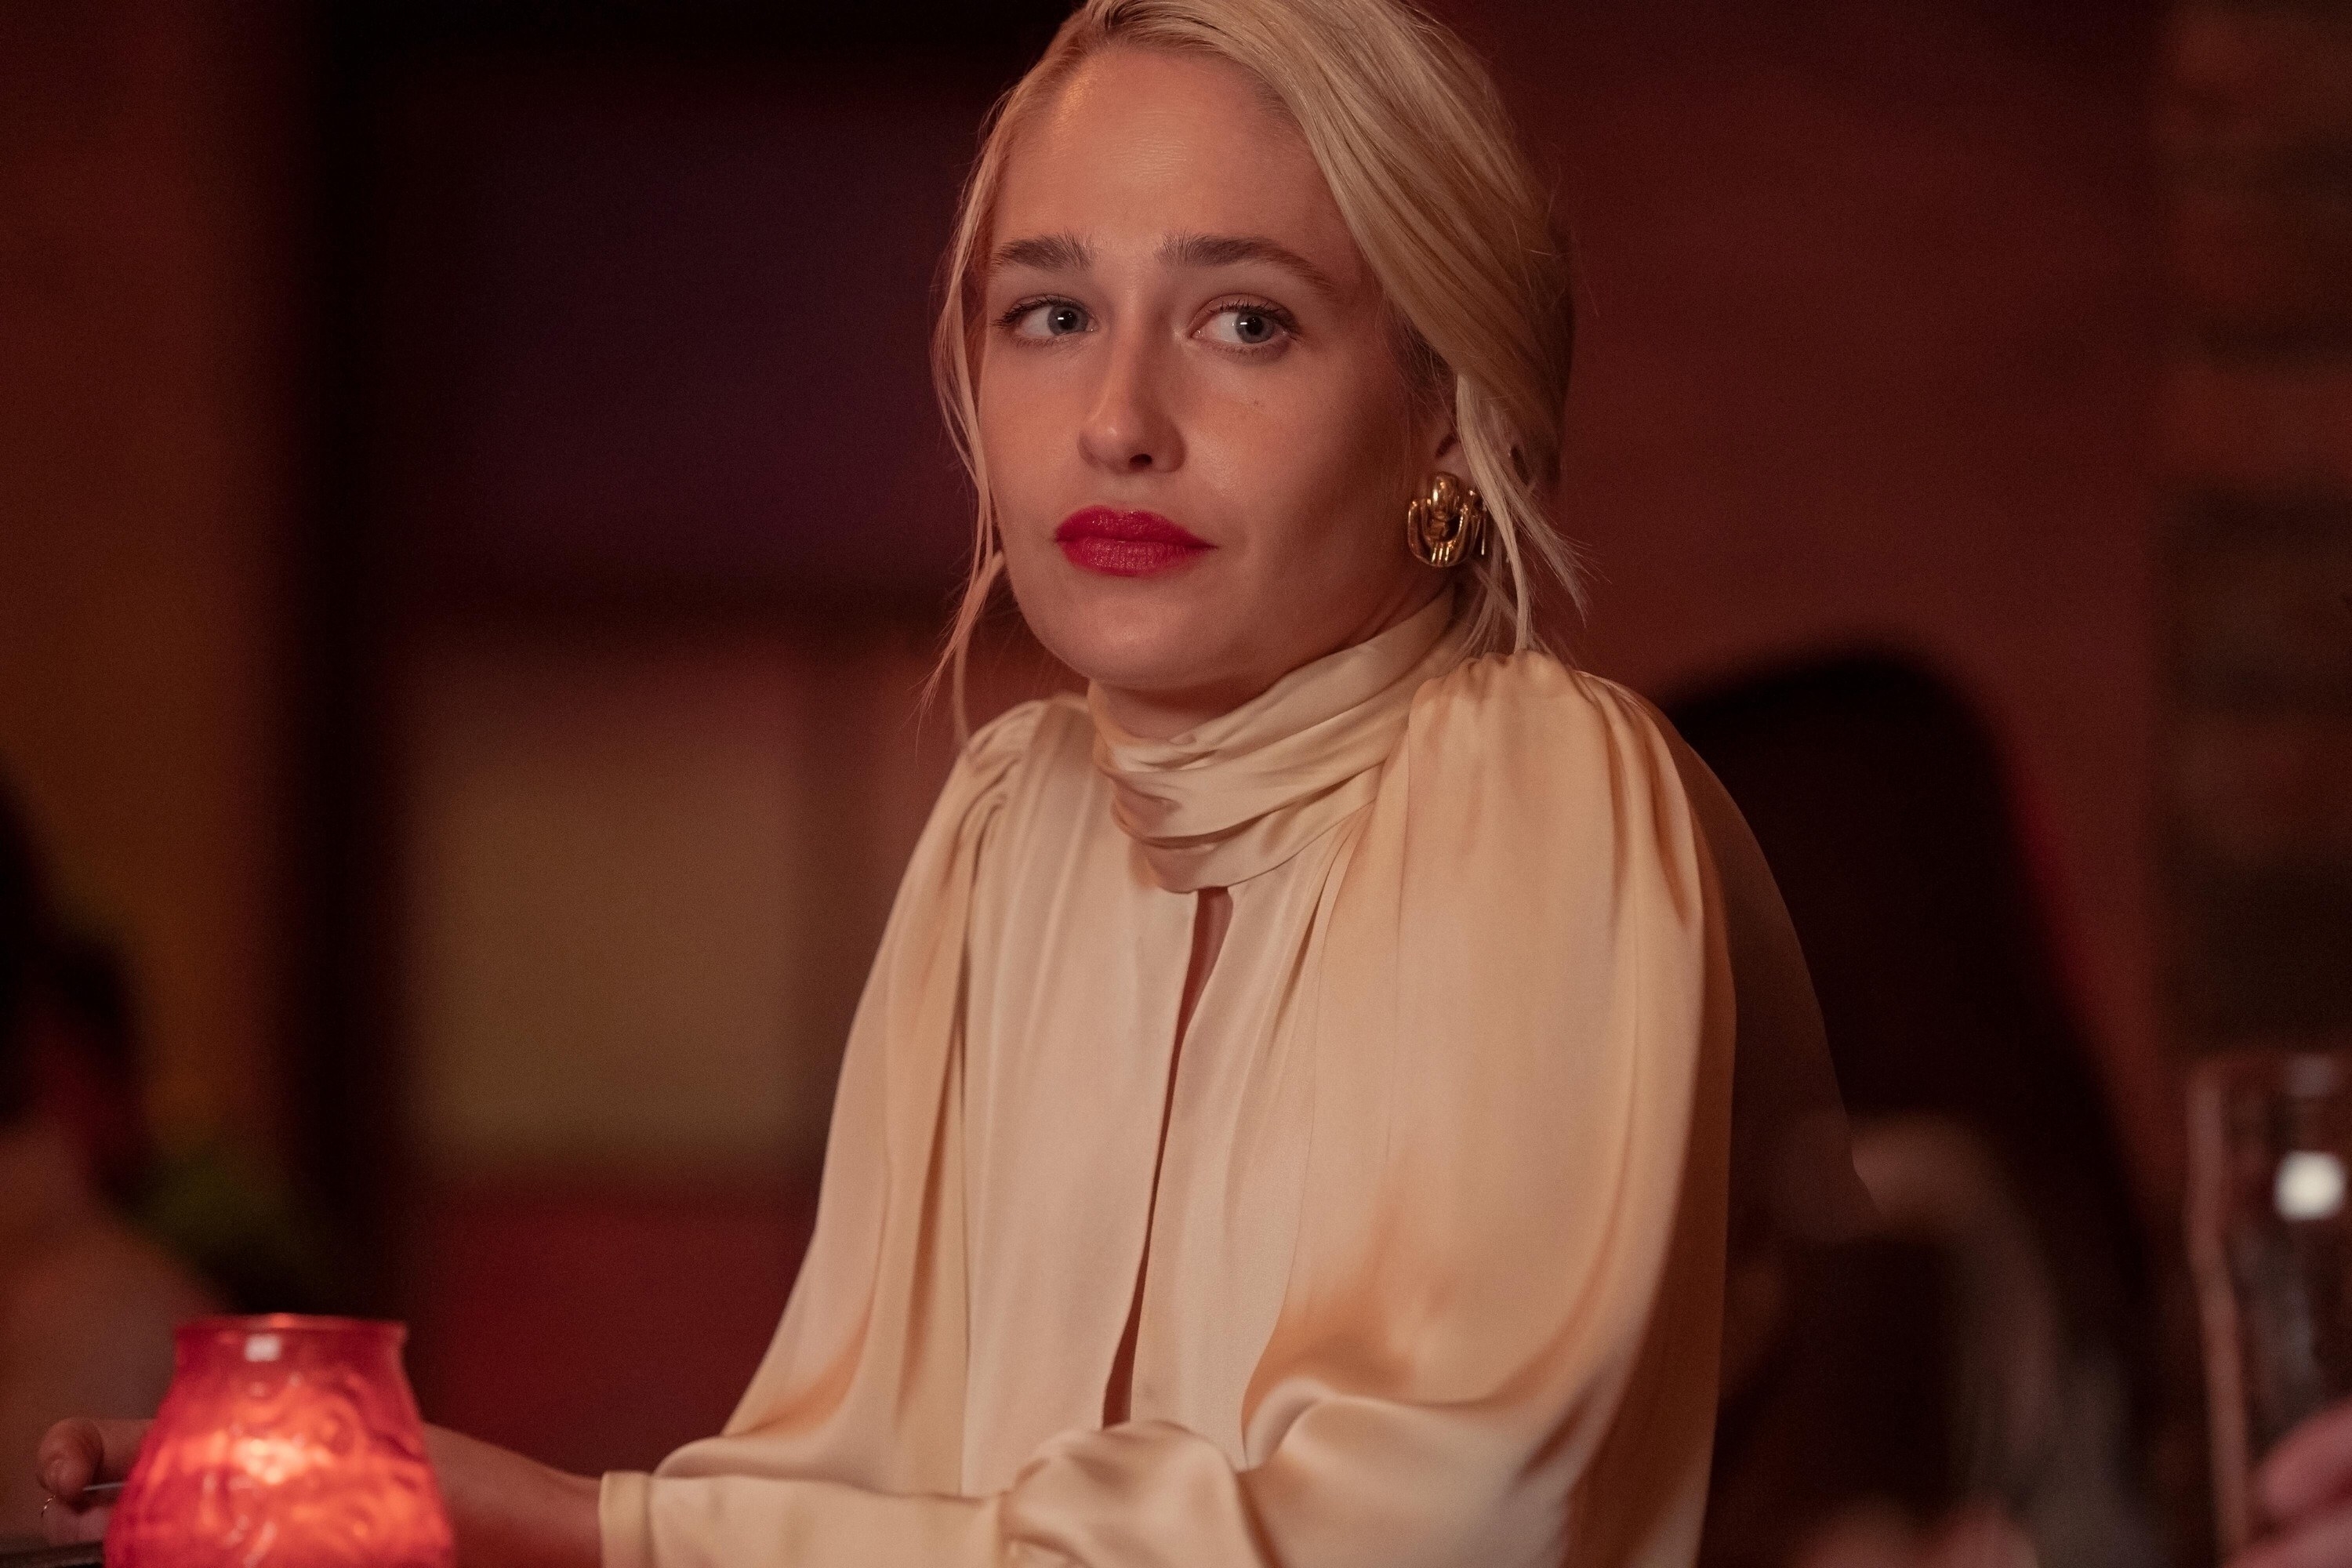 Jemima Kirke as Melissa in Conversations With Friends